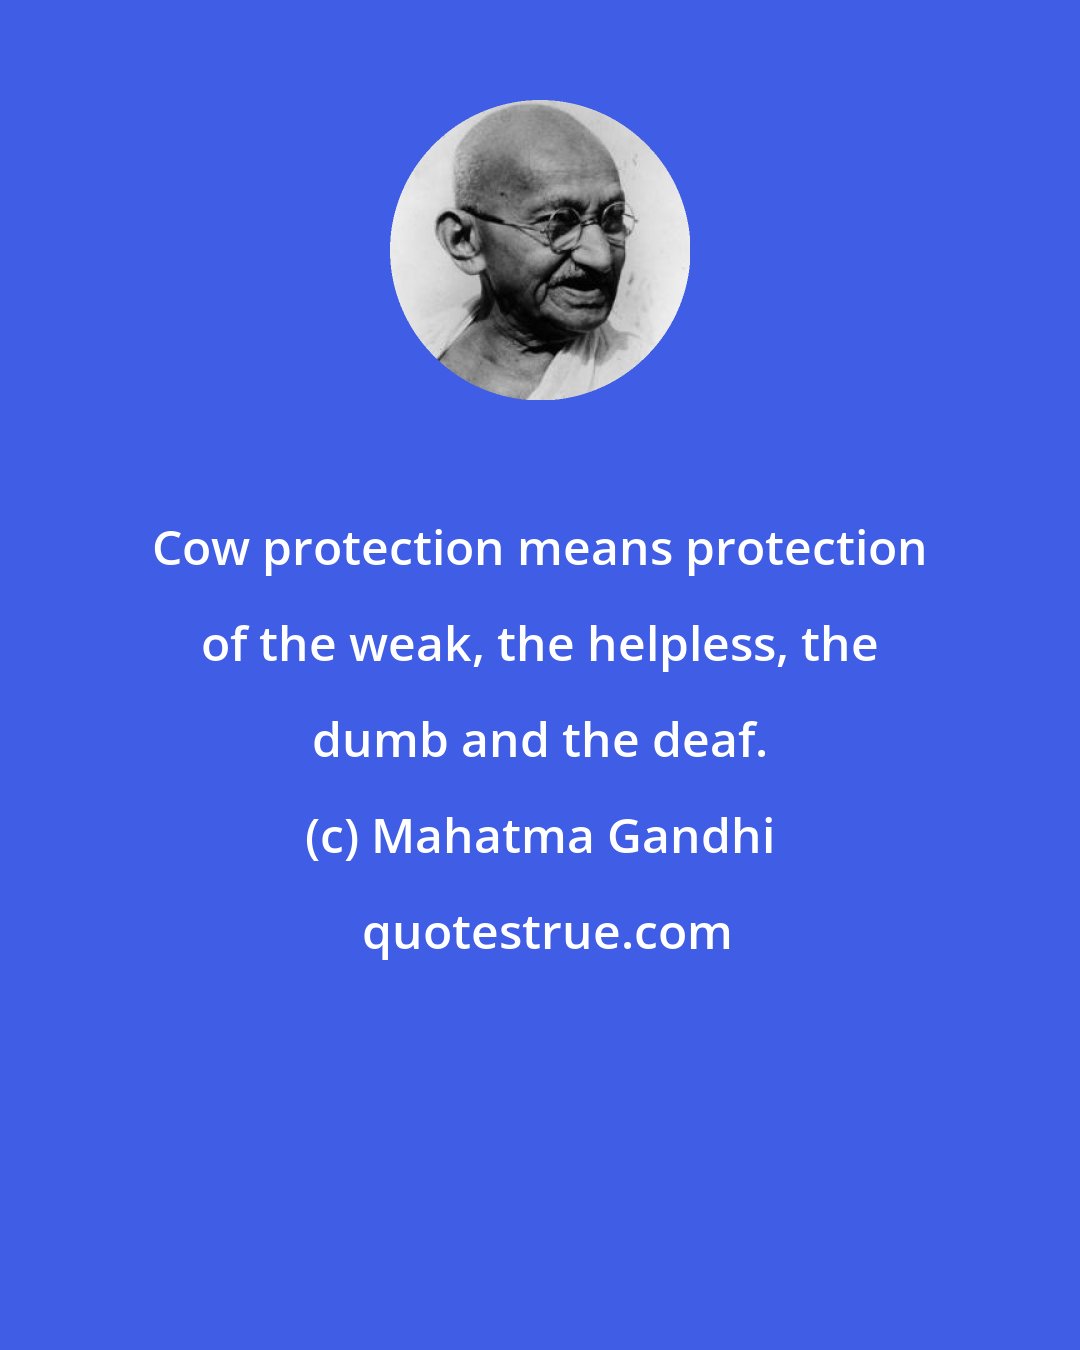 Mahatma Gandhi: Cow protection means protection of the weak, the helpless, the dumb and the deaf.